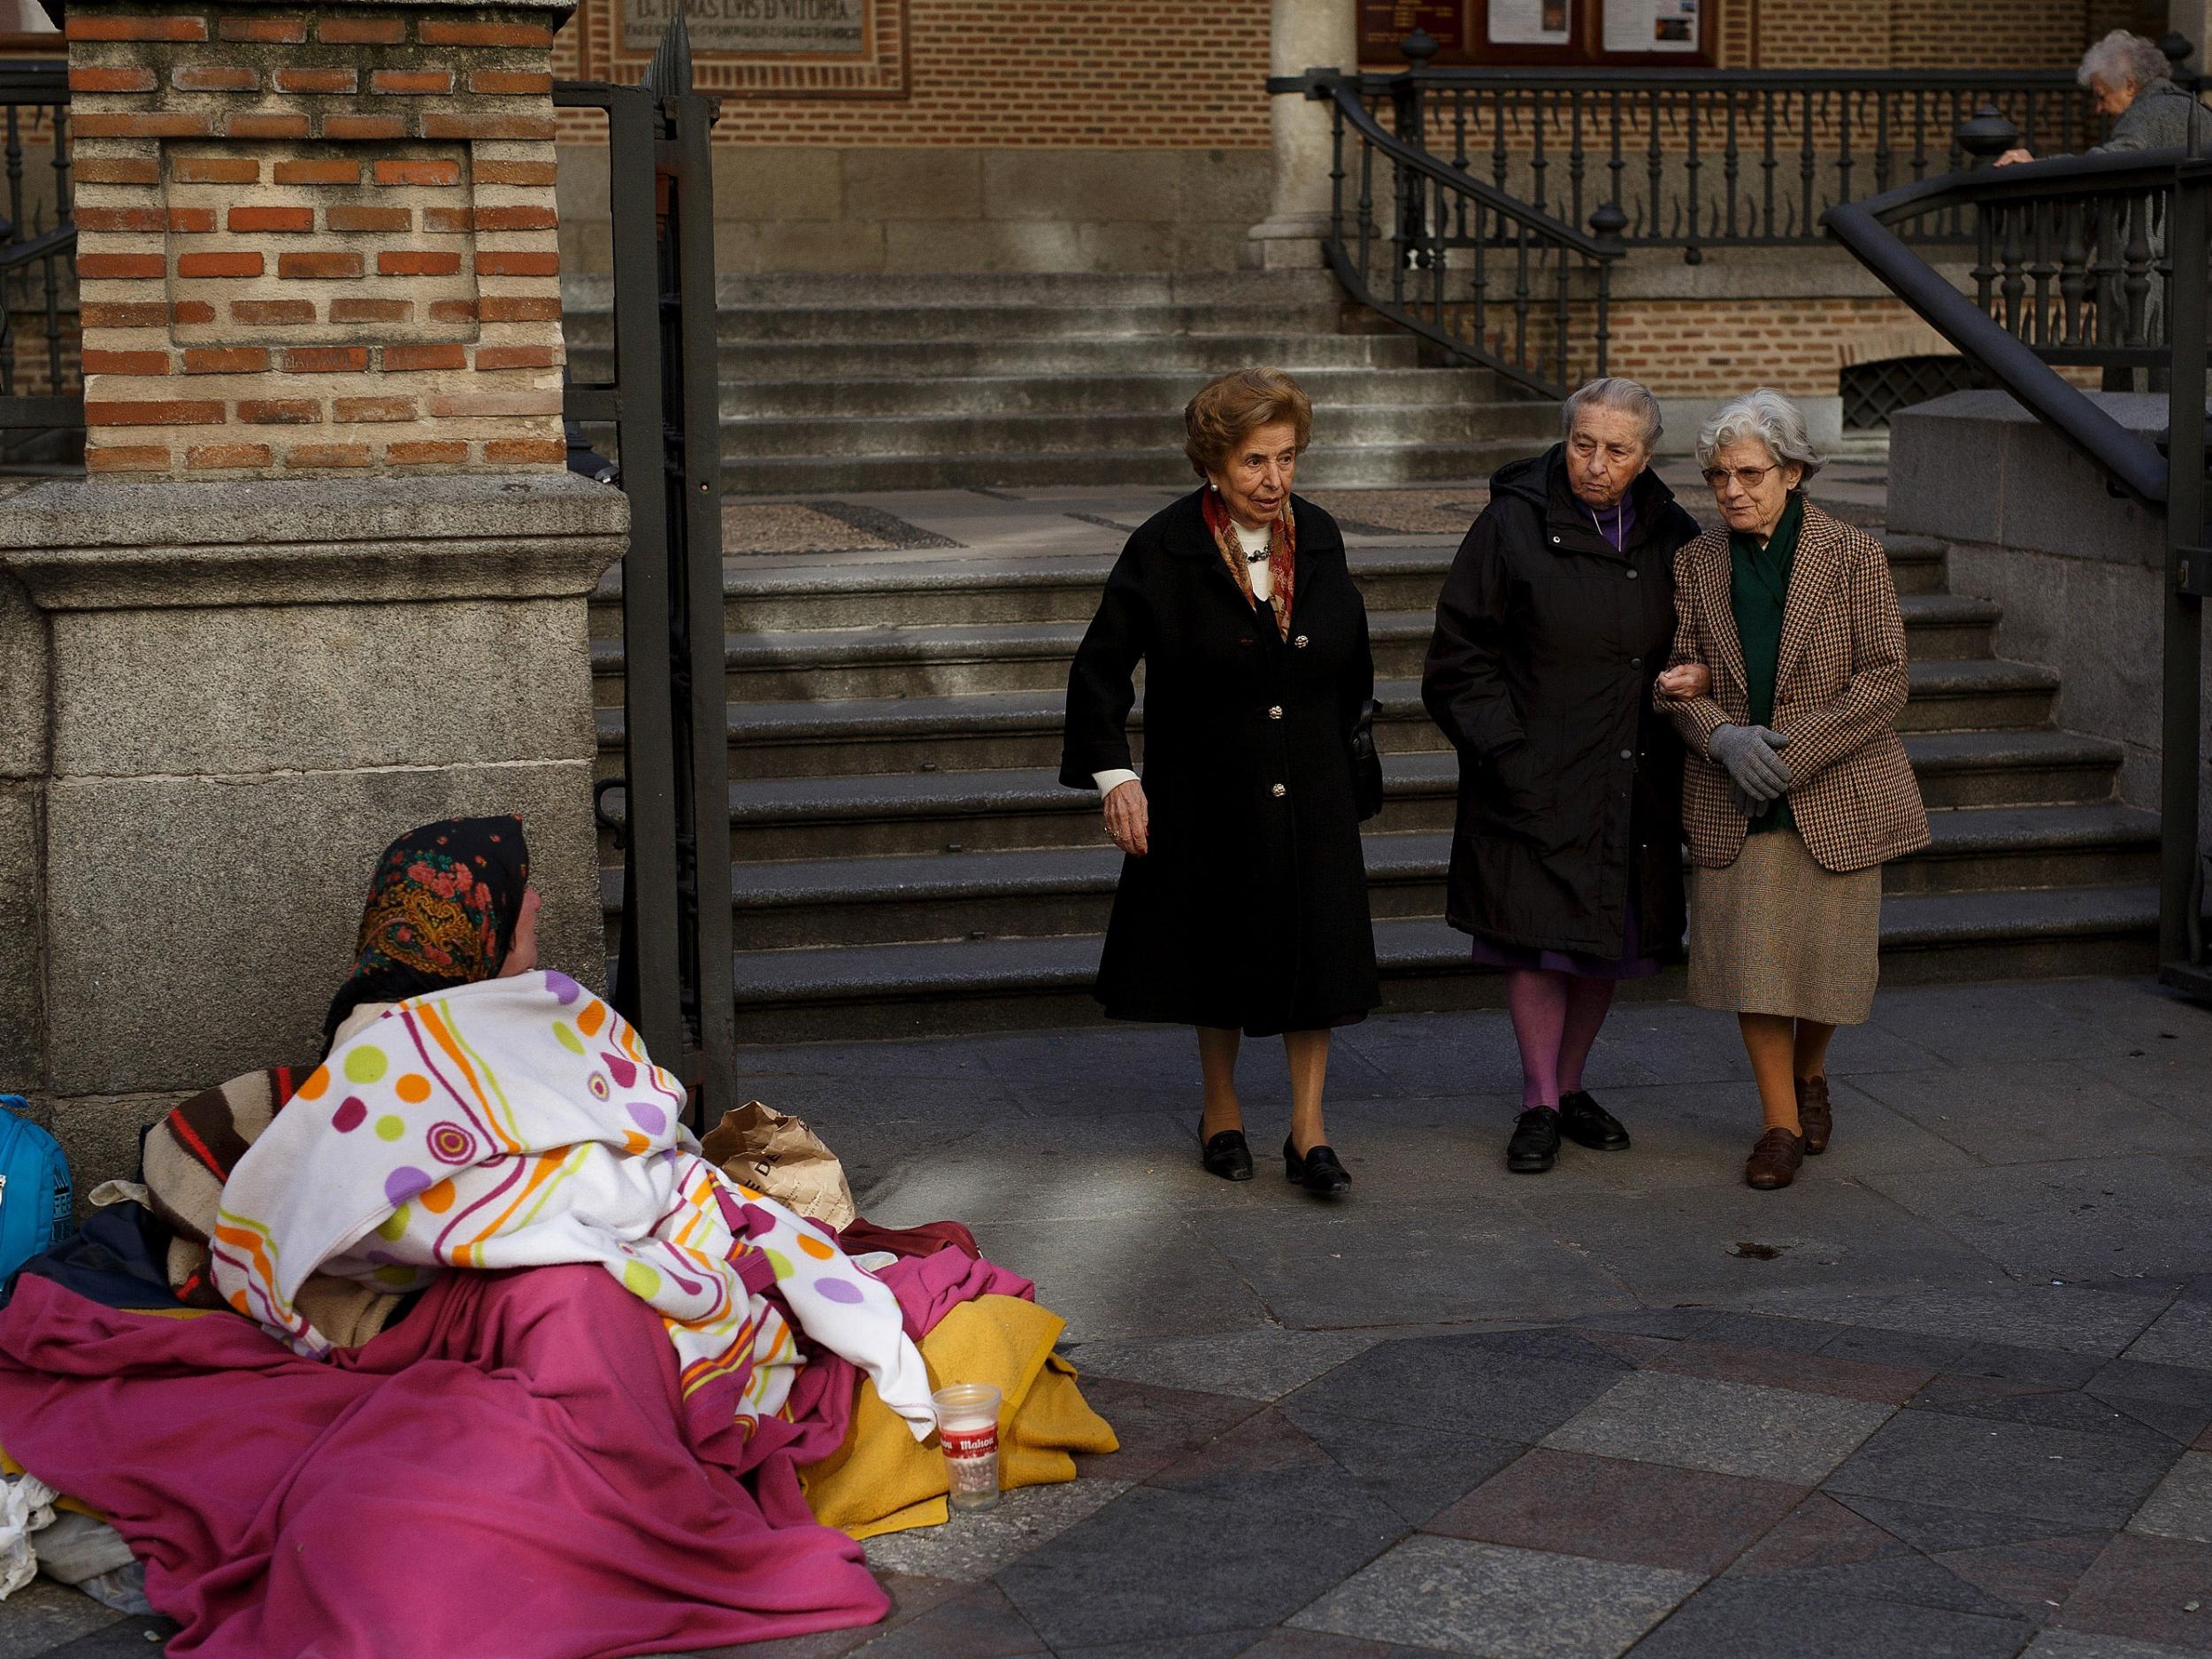 A woman begs in the street as women walk past on November 26, 2015 in Madrid, Spain. According to a recent study Madrid was ranked the most segregated city in Europe between rich and poor.